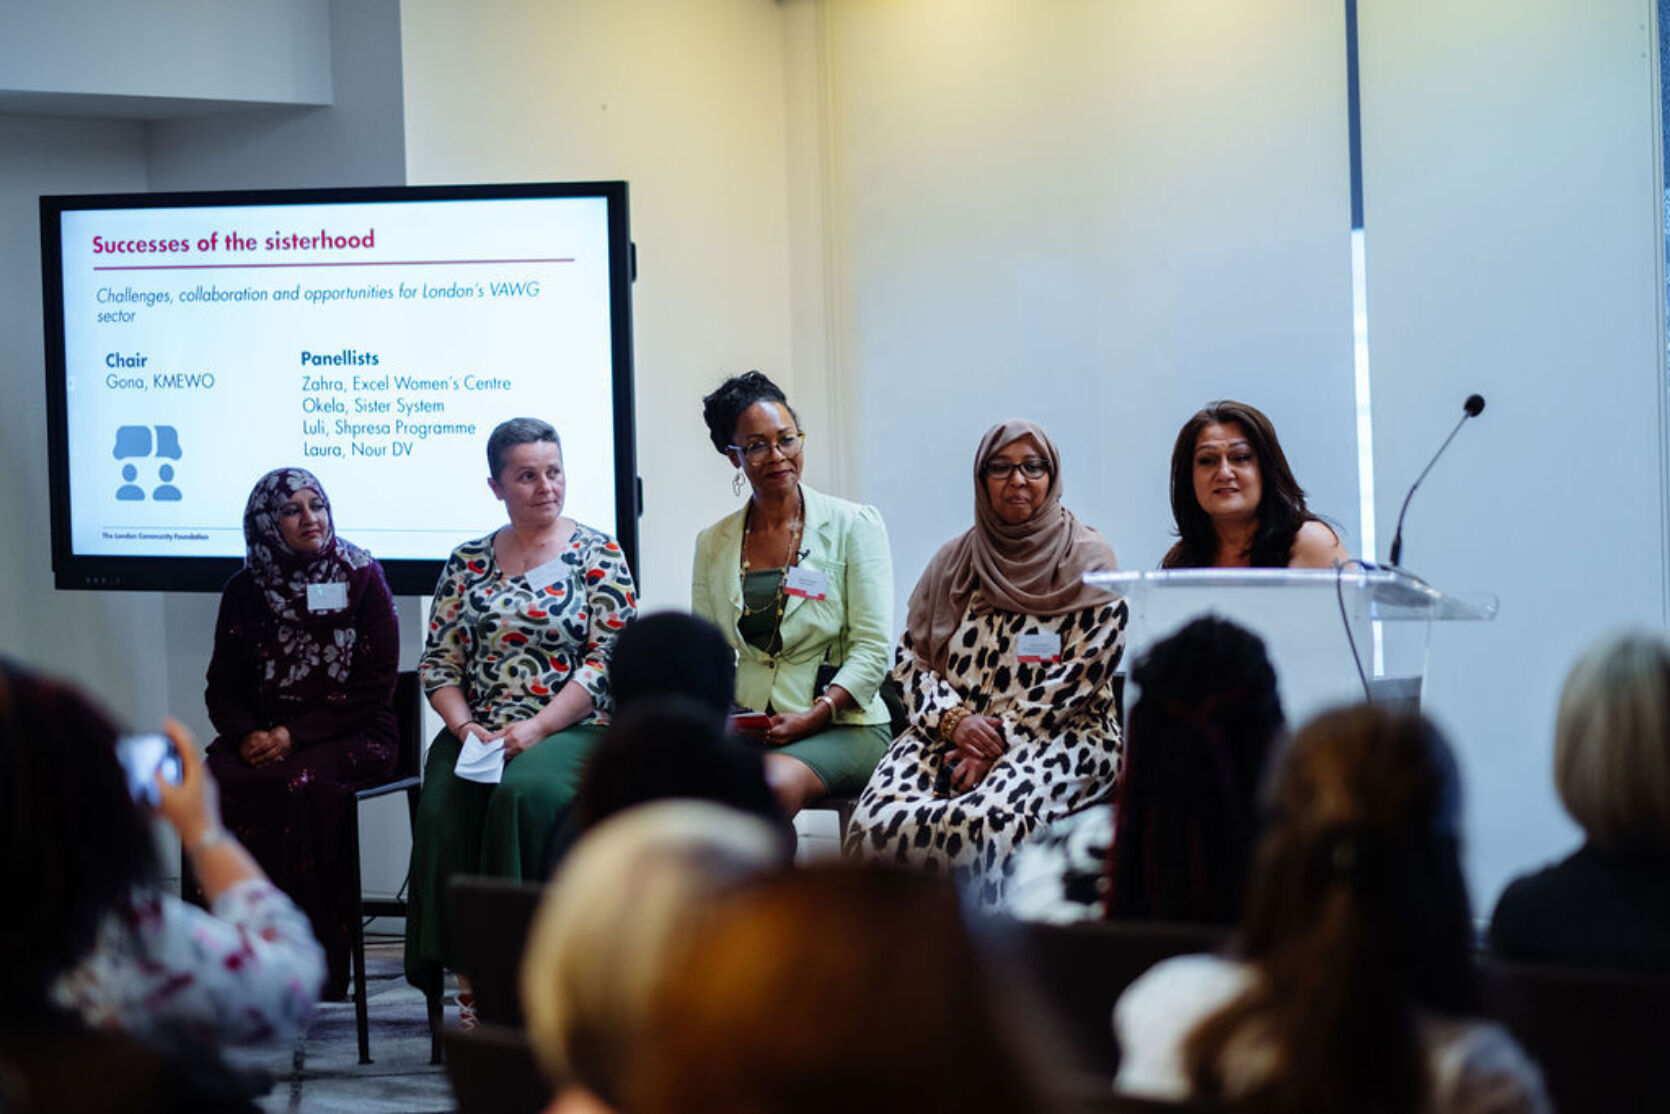 Panellists sit together in a line at the VAWG Grassroots Fund event. In the foreground you can see the back of the audience watching. In the background is a large screen featuring presentation slides.